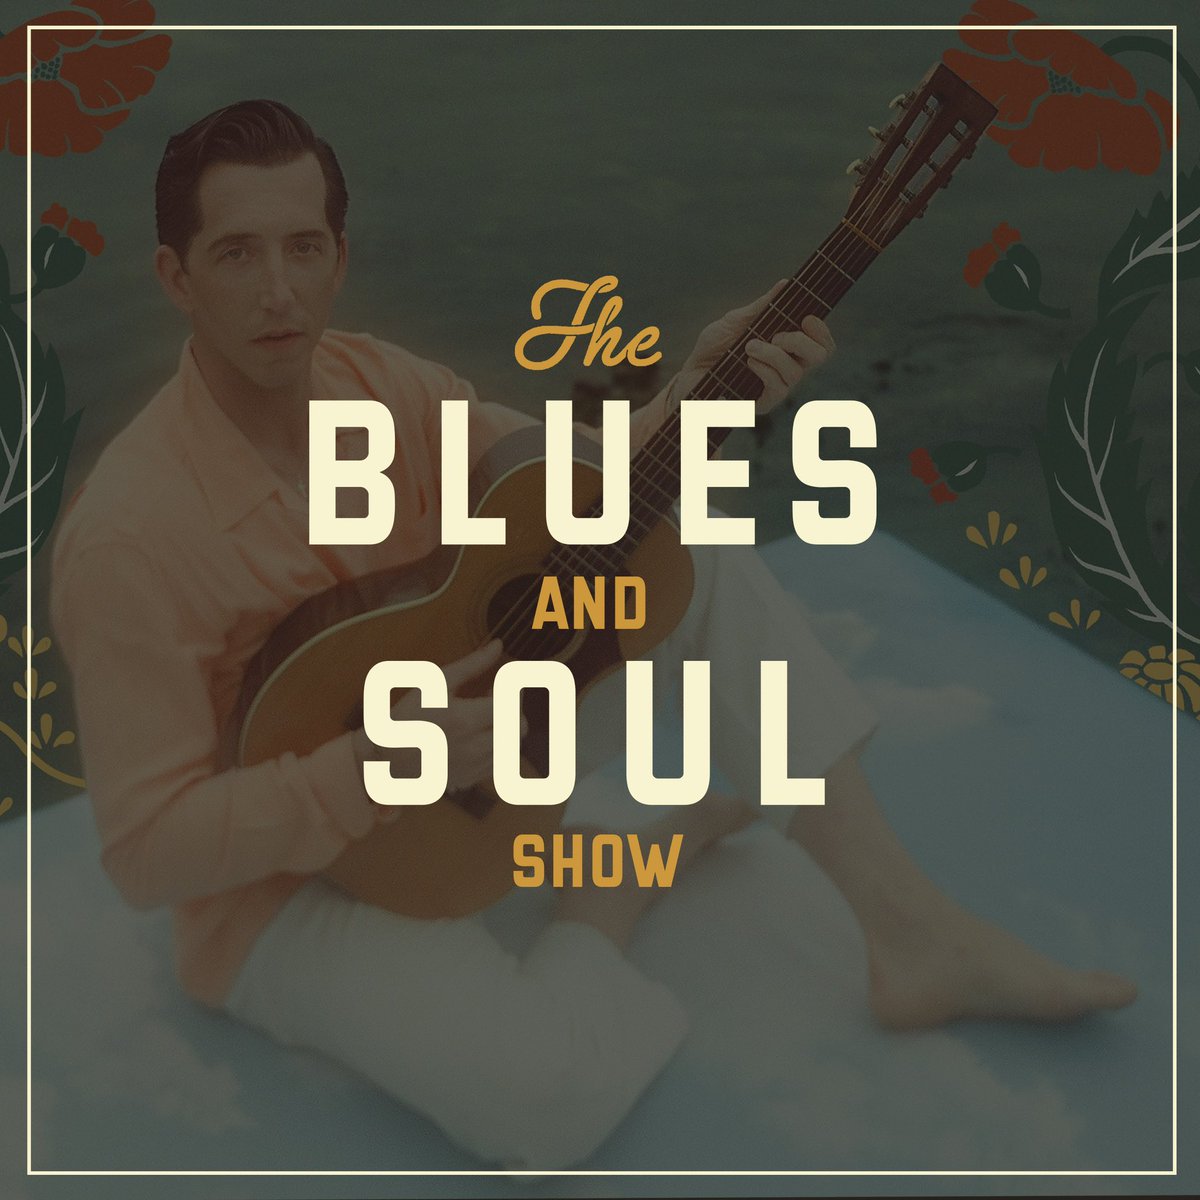 Great interview with @PokeyLaFarge on the latest episode of The Blues and Soul Show on Spotify. Listen back here: open.spotify.com/episode/7Gxse0…